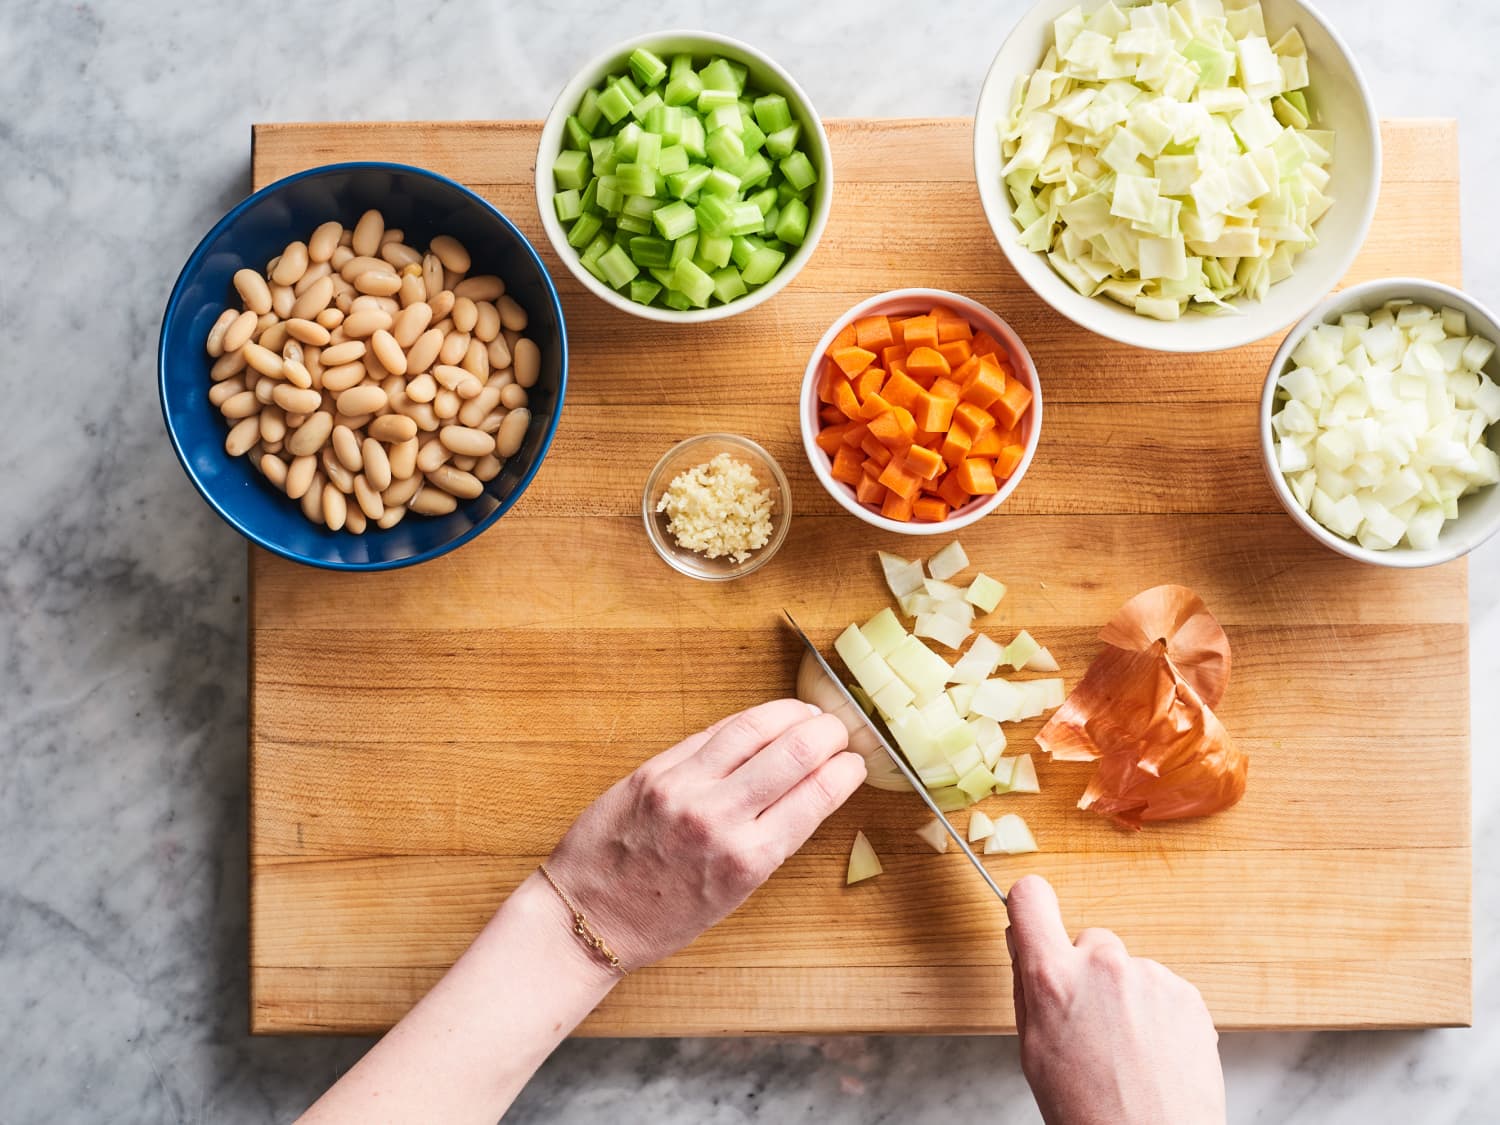 I Tried Doing Mise en Place Every Time I Cooked for a Week